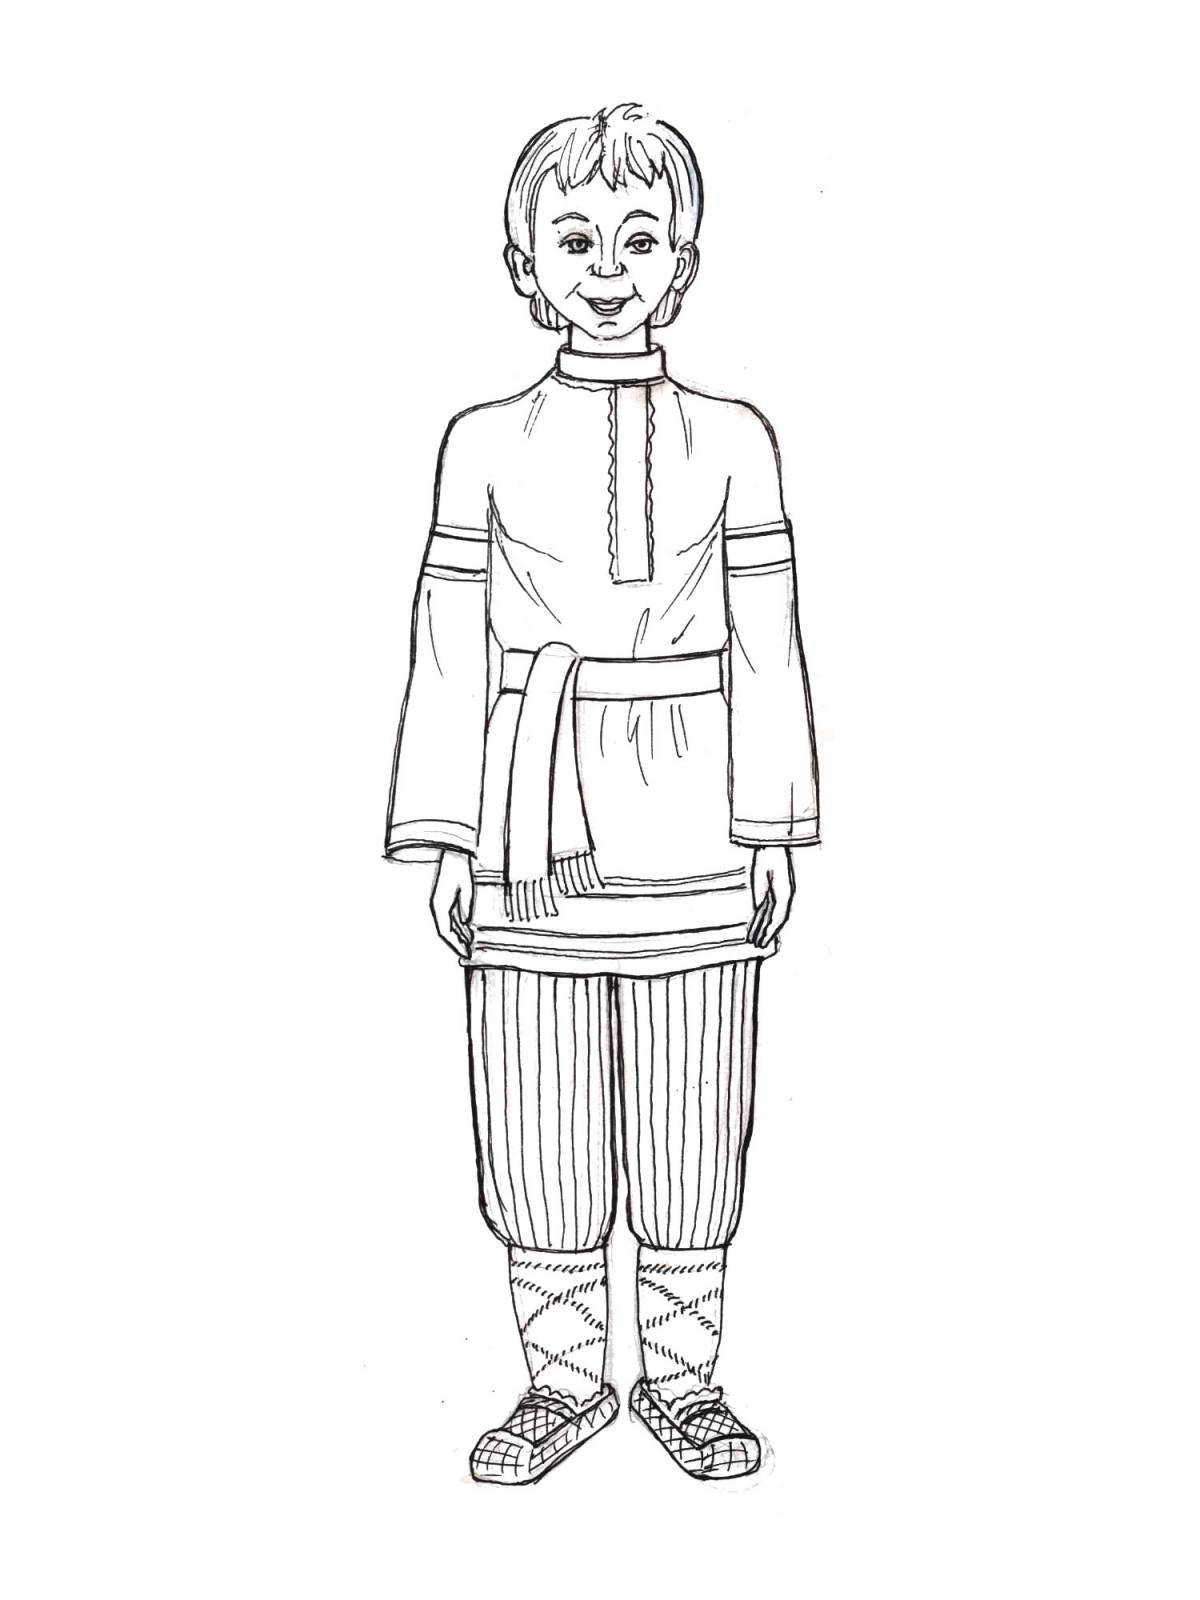 Coloring page of traditional Russian folk costume